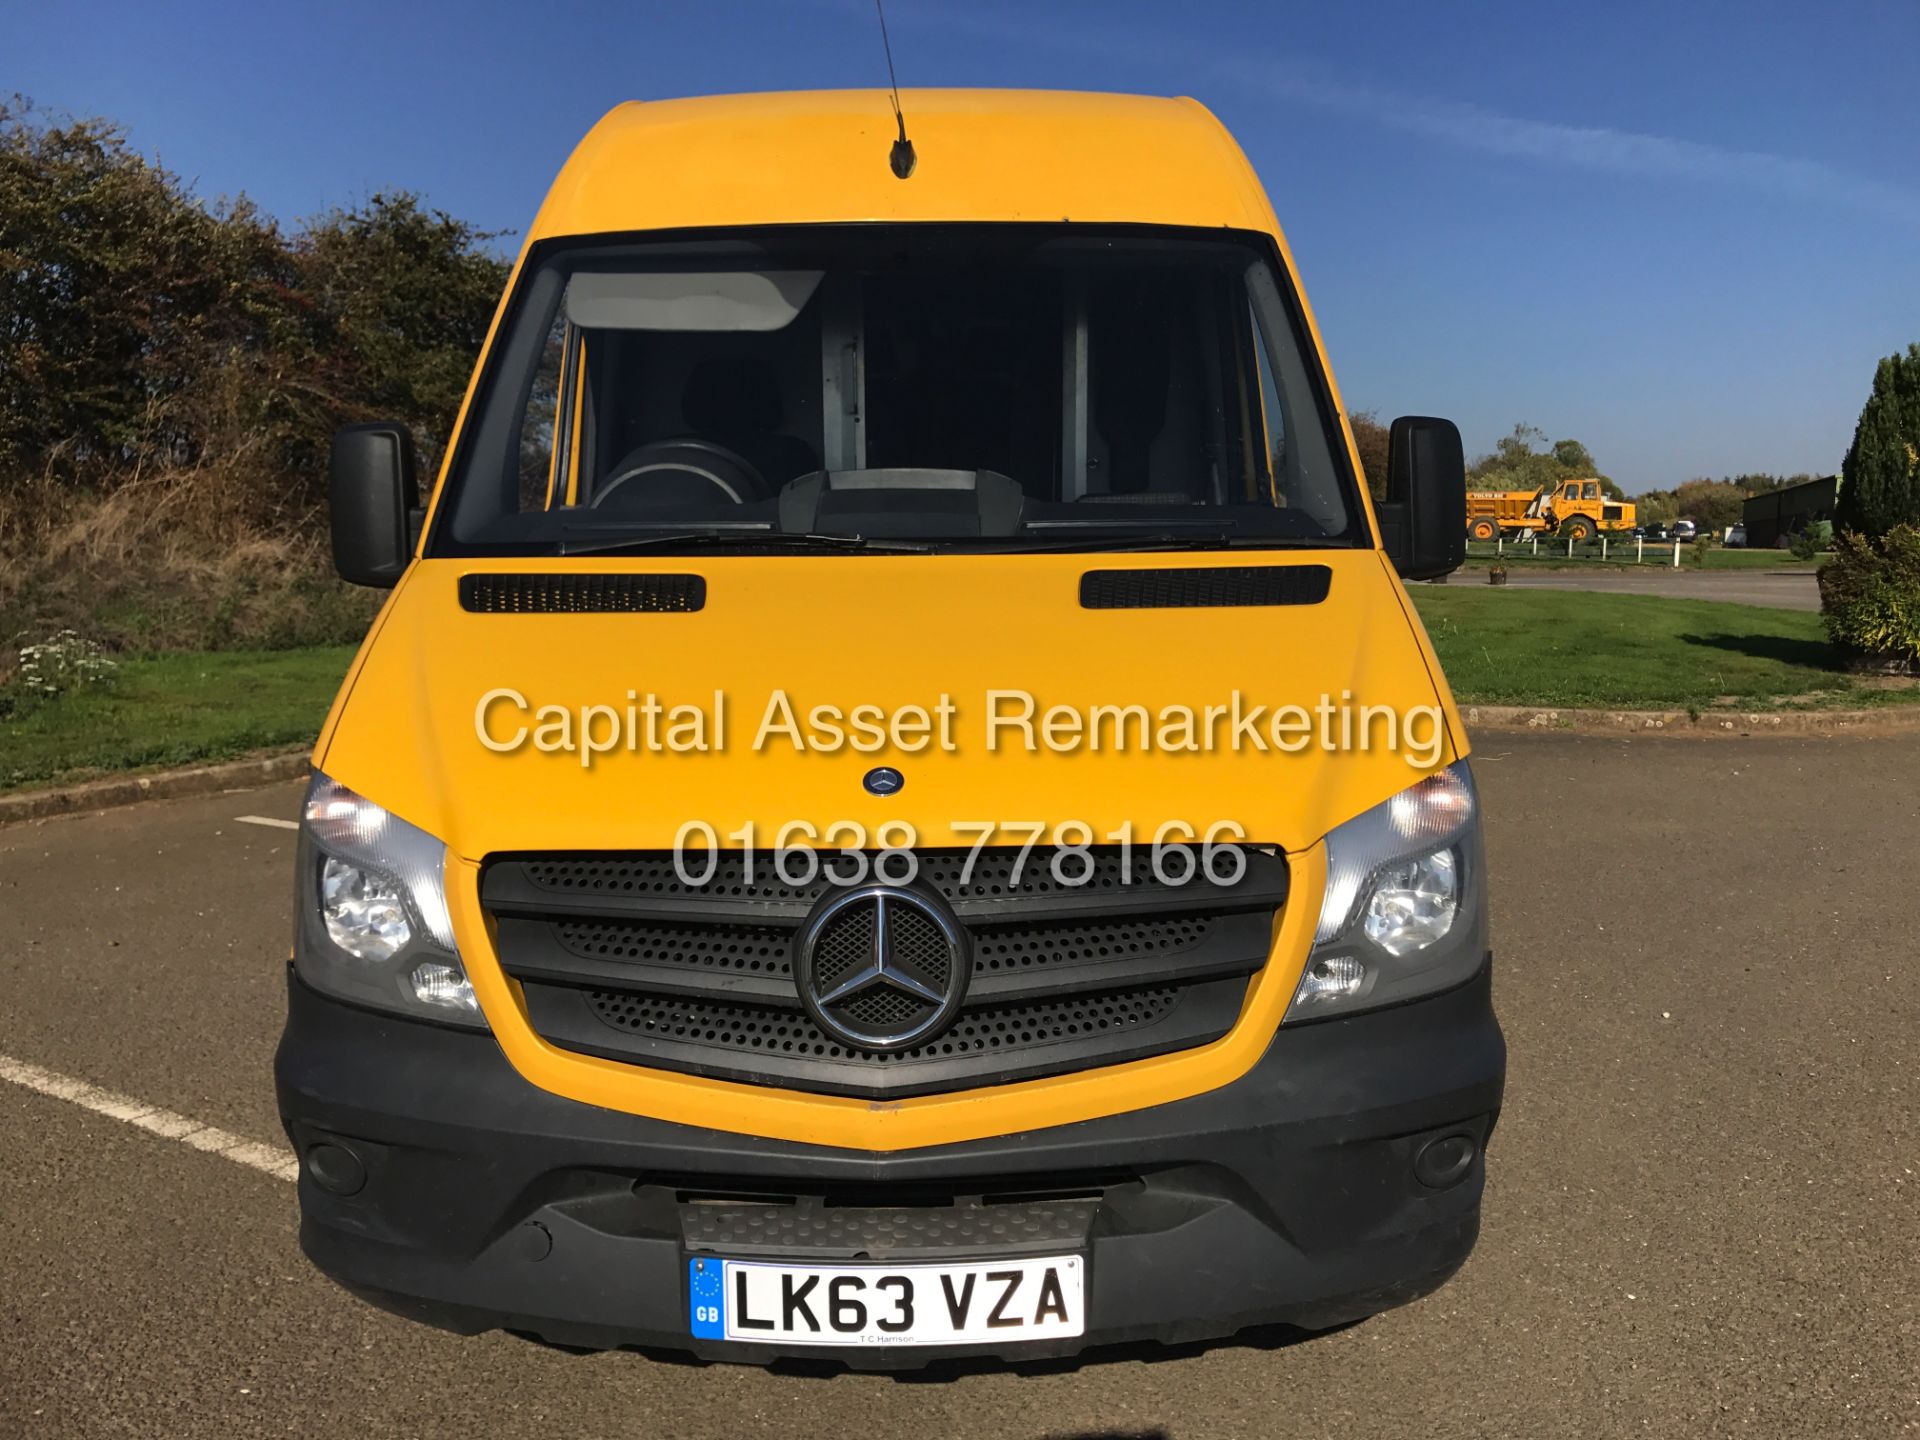 MERCEDES SPRINTER 313CDI "130BHP - 6 SPEED" 1 OWNER (2014 MODEL - NEW SHAPE) AIR CON - ELEC PACK - Image 3 of 15